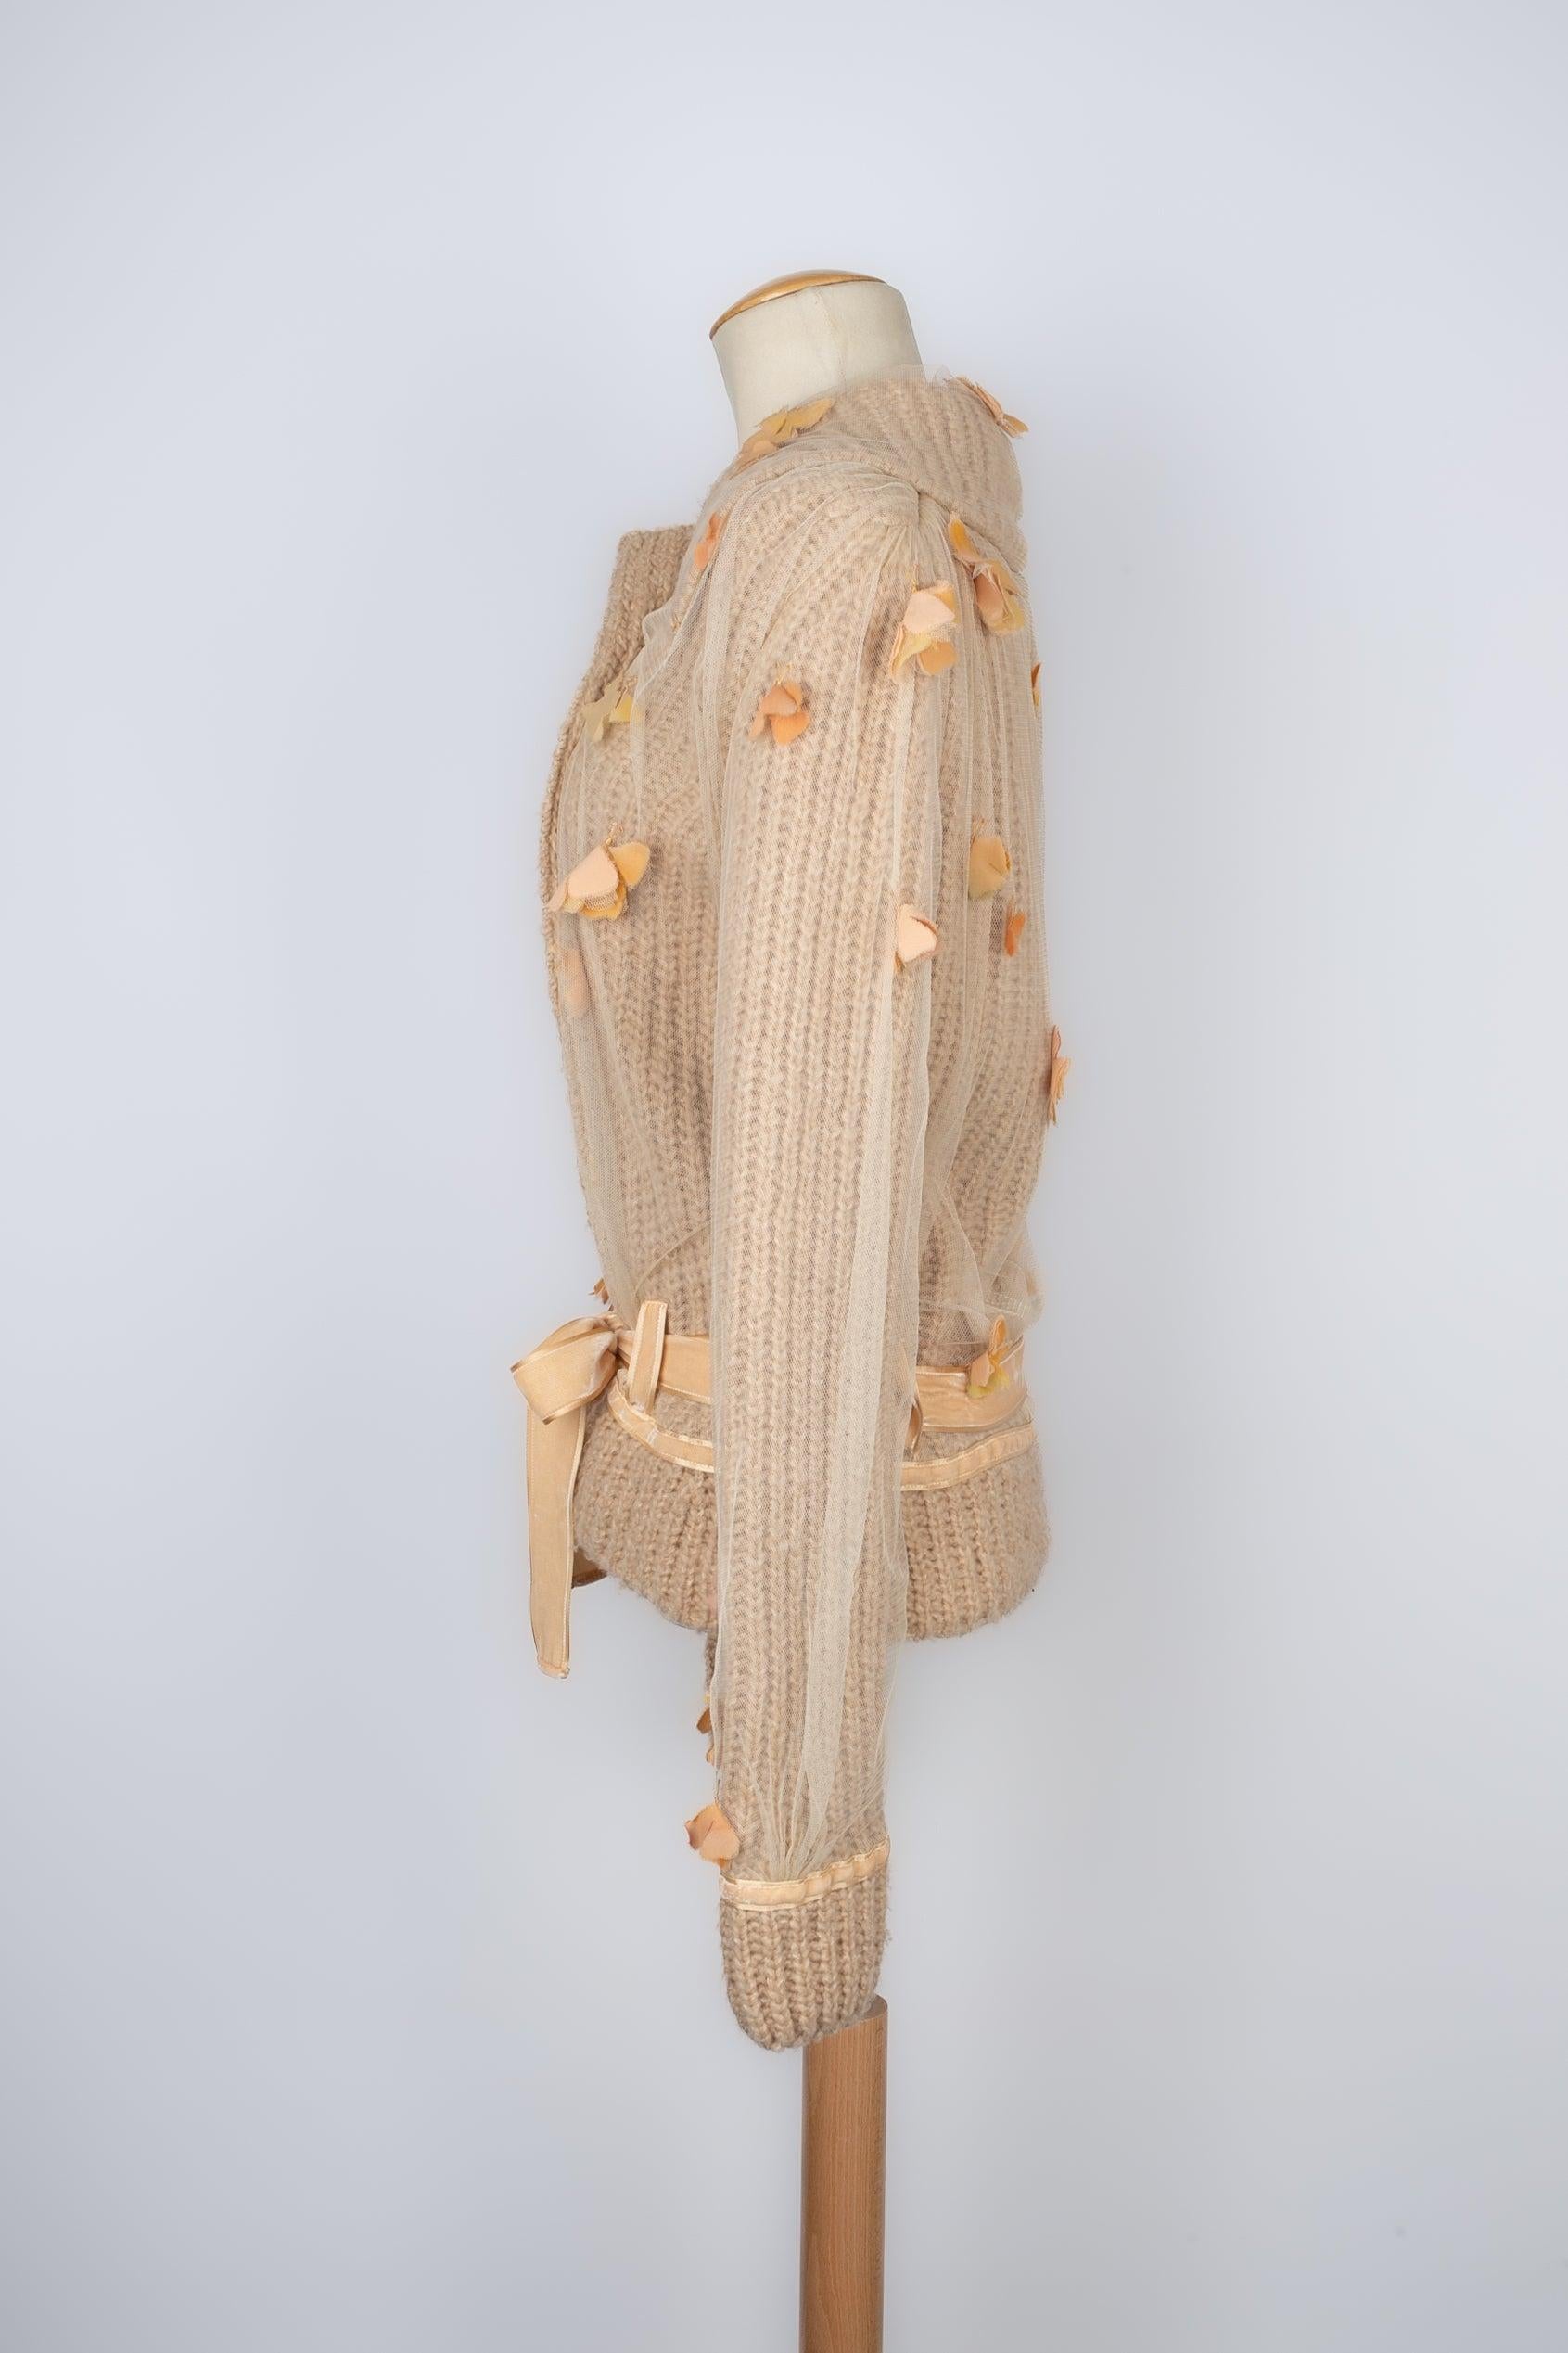 Galliano - (Made in Italy) Wool and camel wool cardigan decorated with butterflies. S size indicated.

Additional information:
Condition: Very good condition
Dimensions: Shoulder width: 39 cm - Chest: 50 cm - Sleeve length: 71 cm - Length: 63